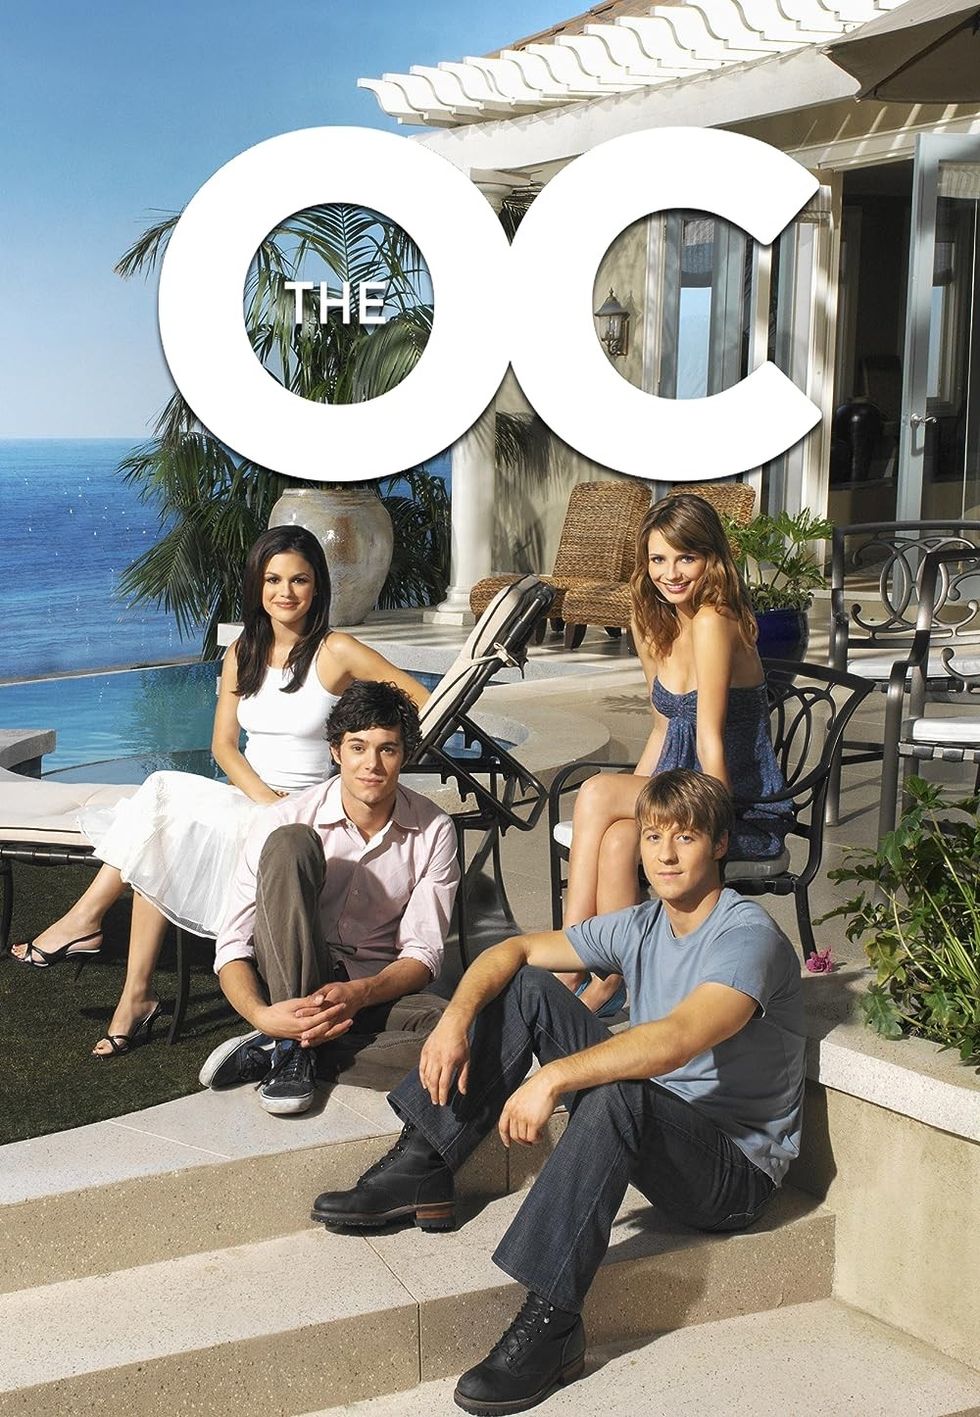 the oc The Best Teen Drama shows